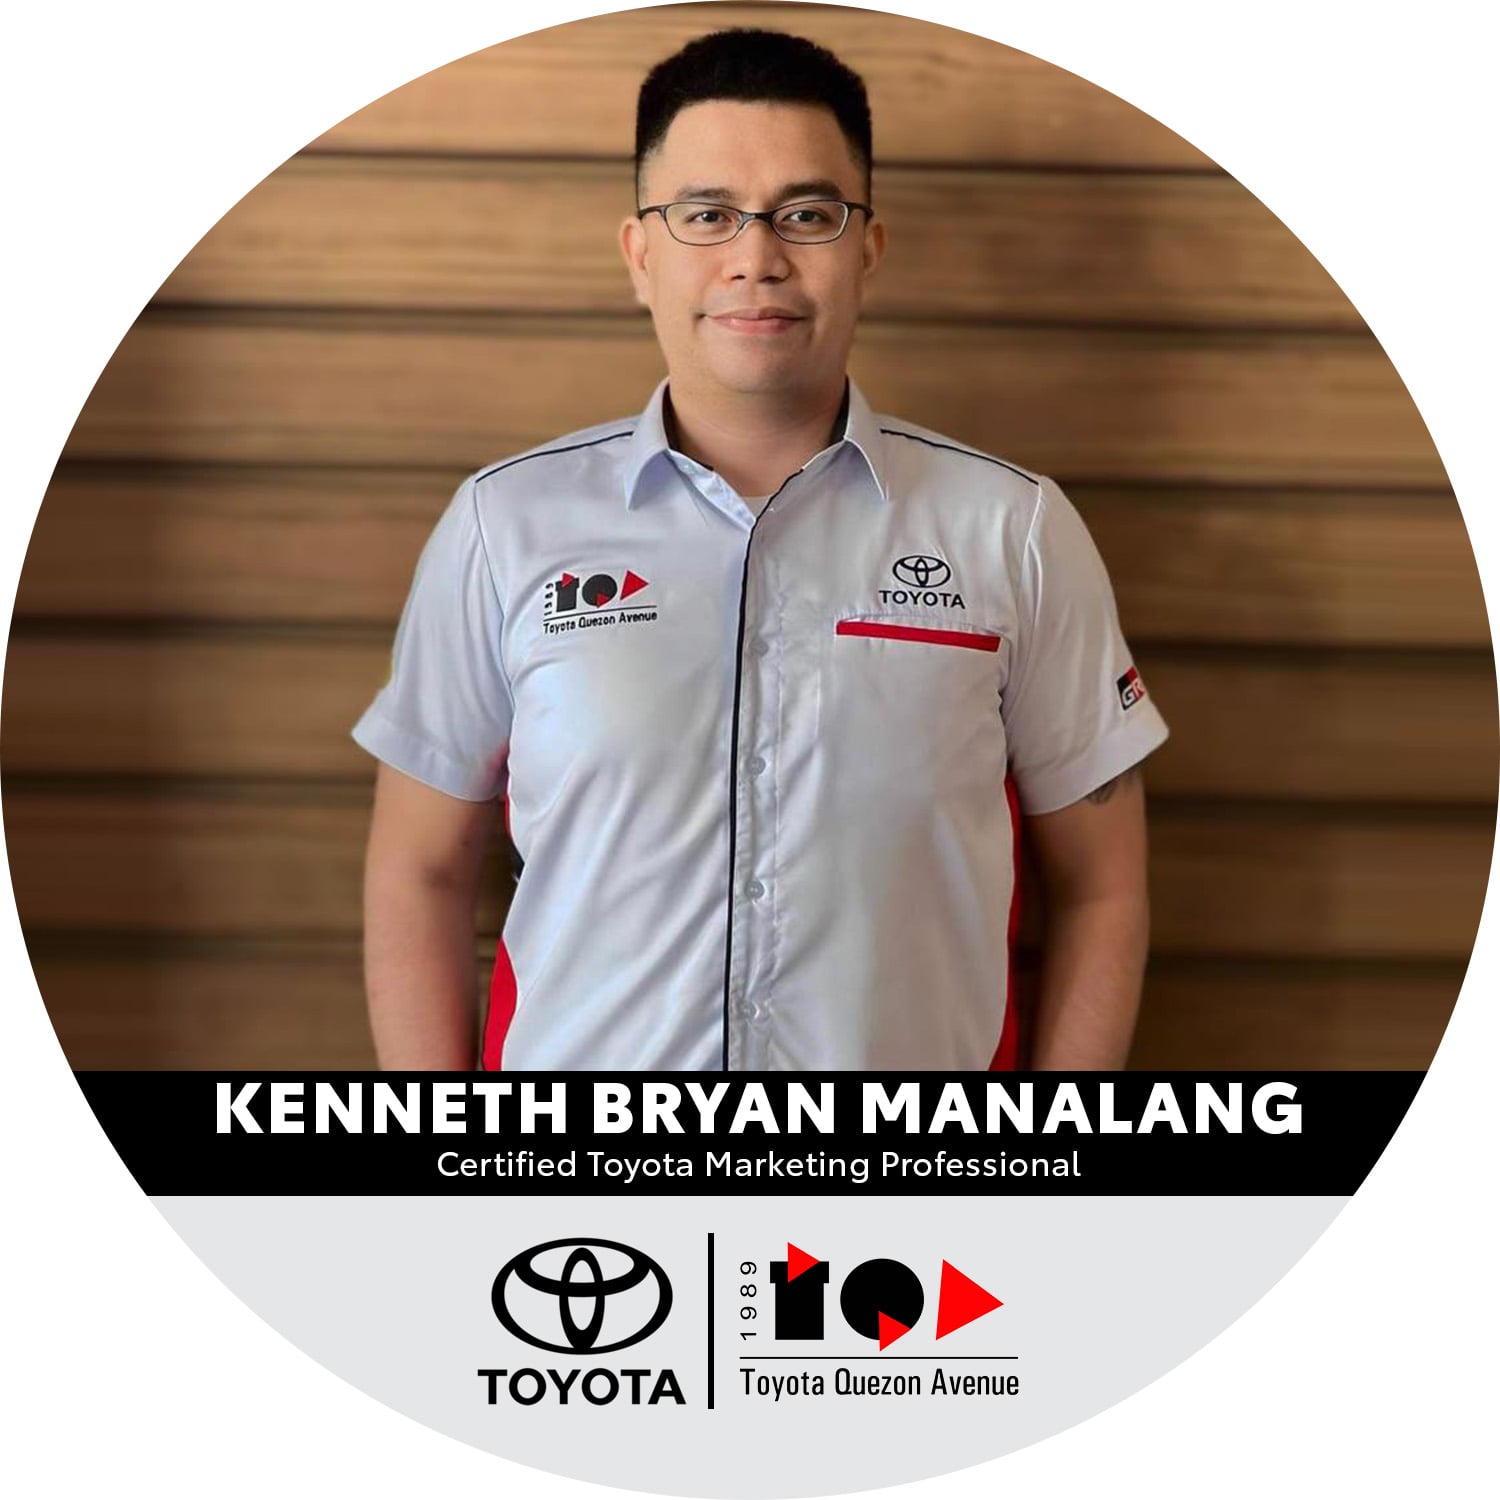 Certified Toyota Marketing Professionals - Kenneth Bryan Manalang